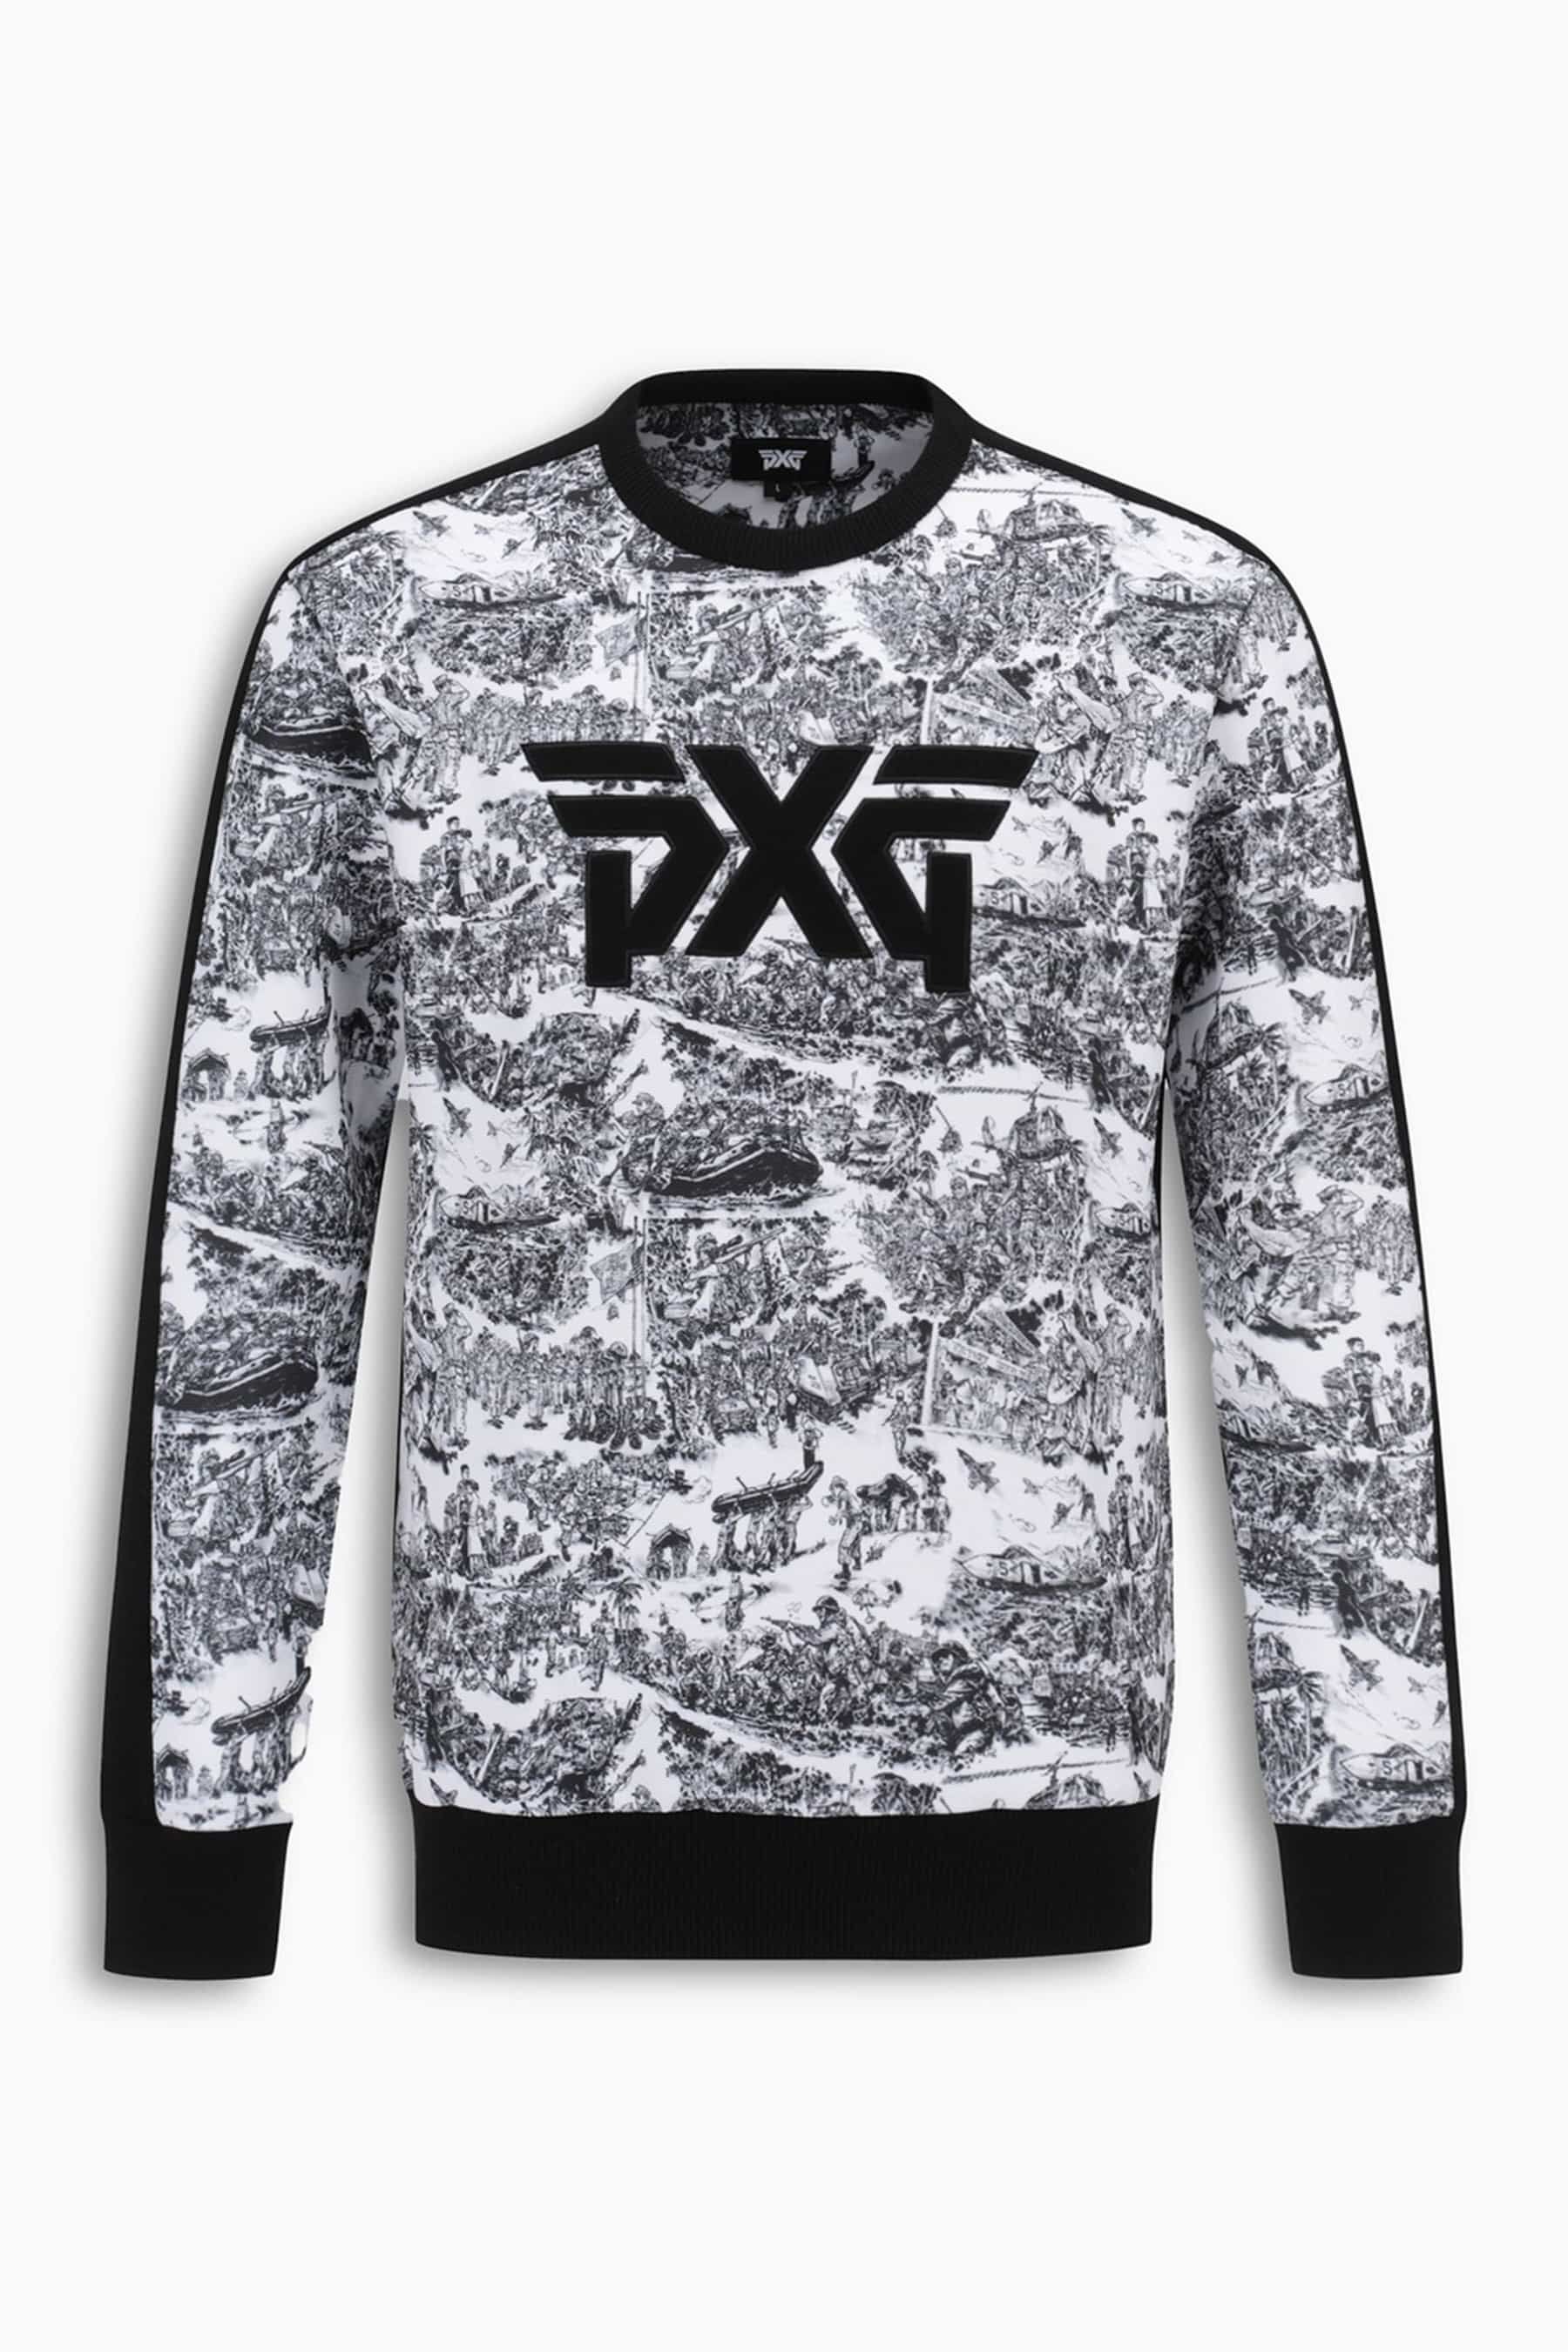 Shop Men's Golf Clothes and Apparel - Online or In-Store | PXG JP